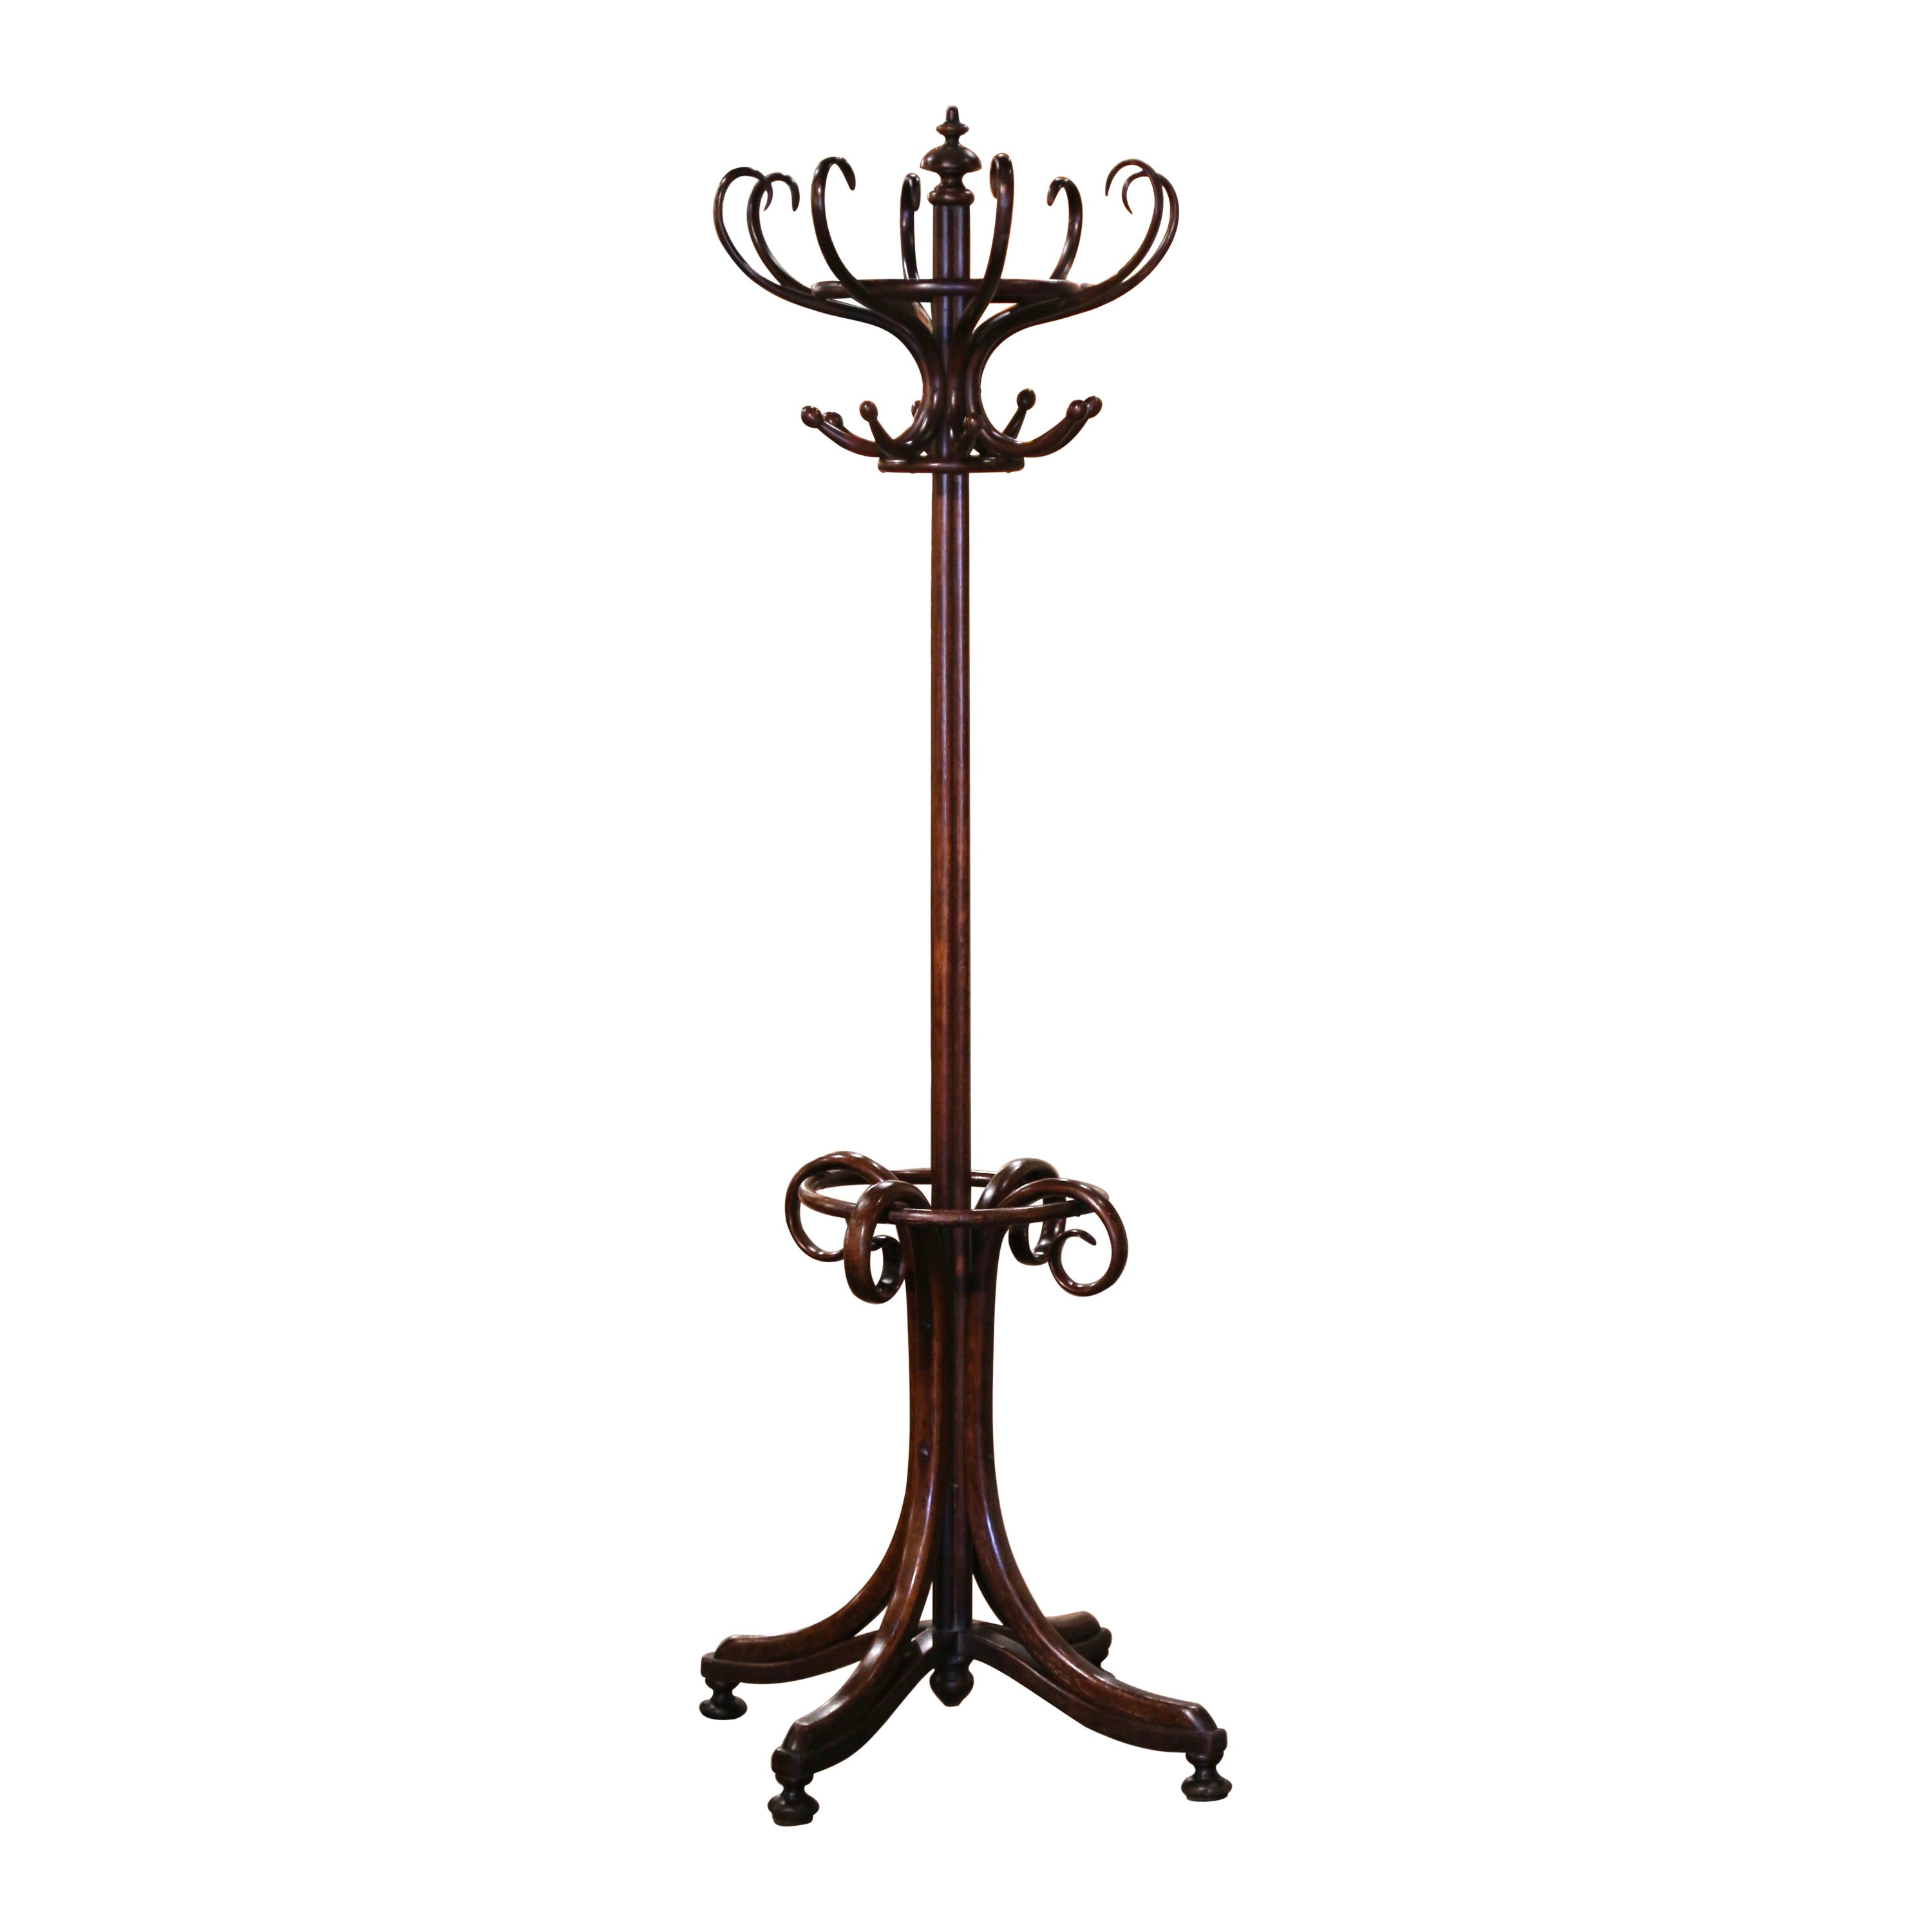 Early 20th Century Carved Bentwood "Perroquet" Coat Rack Halltree Thonet Style